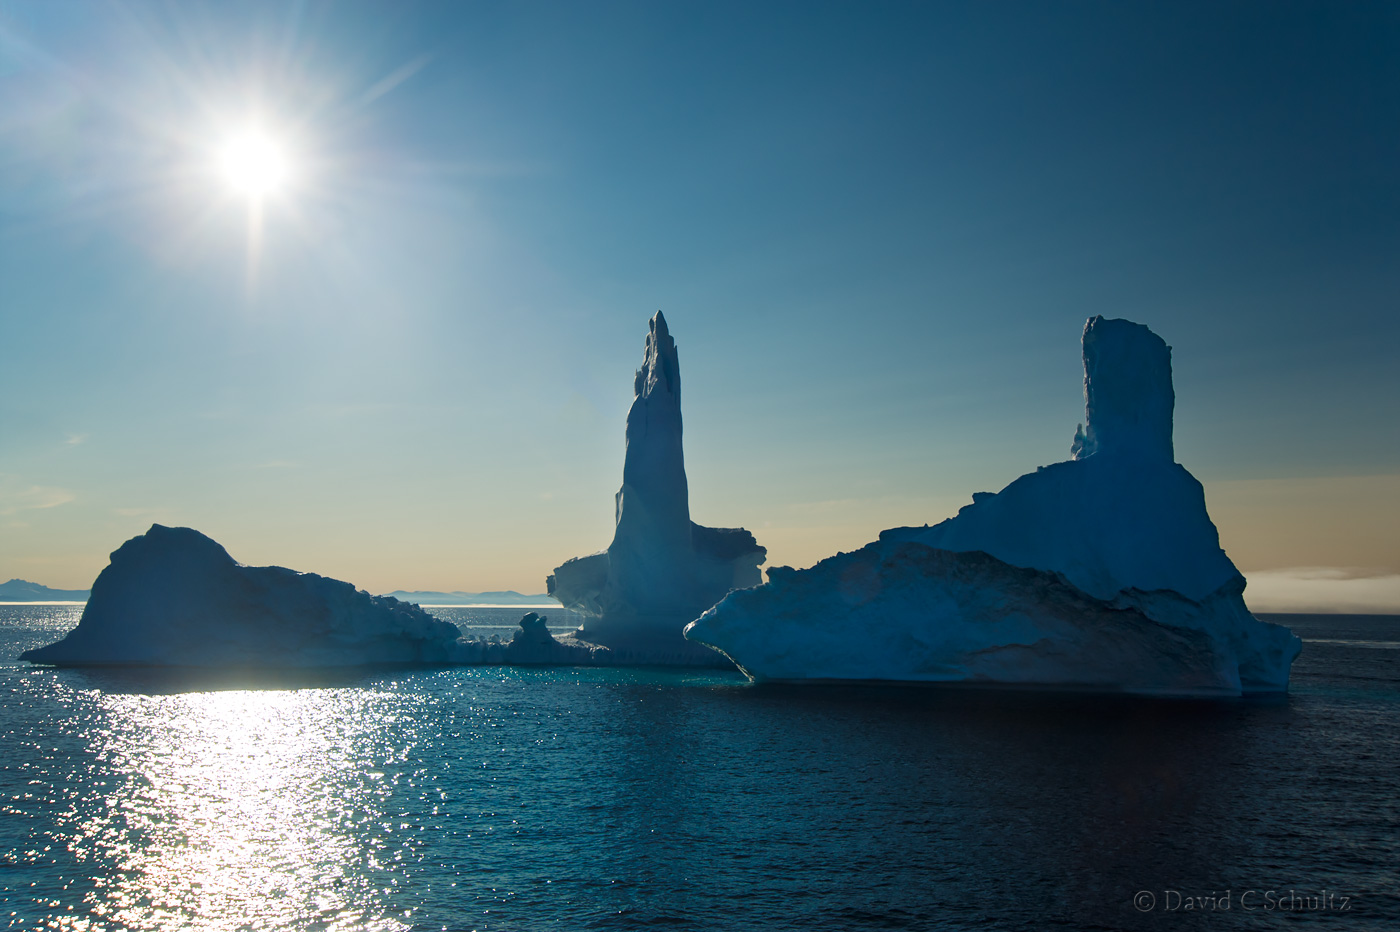 Icebergs in Baffin Bay - Image #167-0648